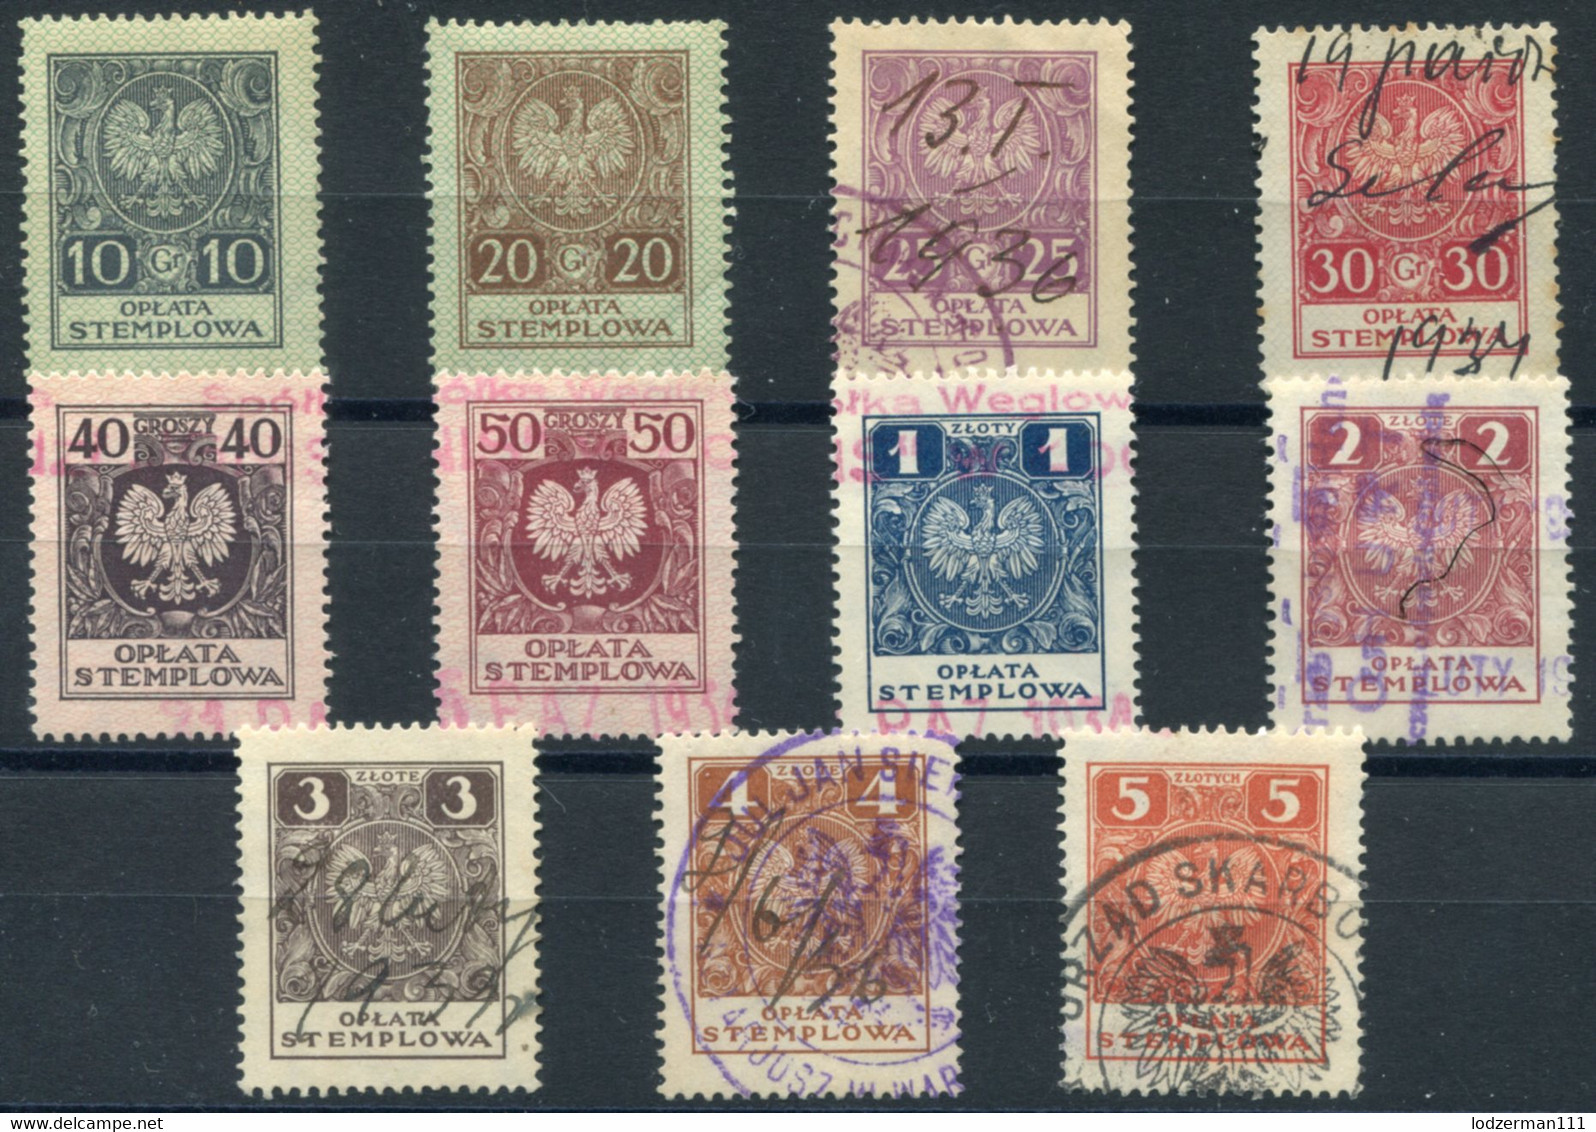 1932 General Zloty Issue #100-110 Compl. Set Used (2 MNH) All VF - Fiscali